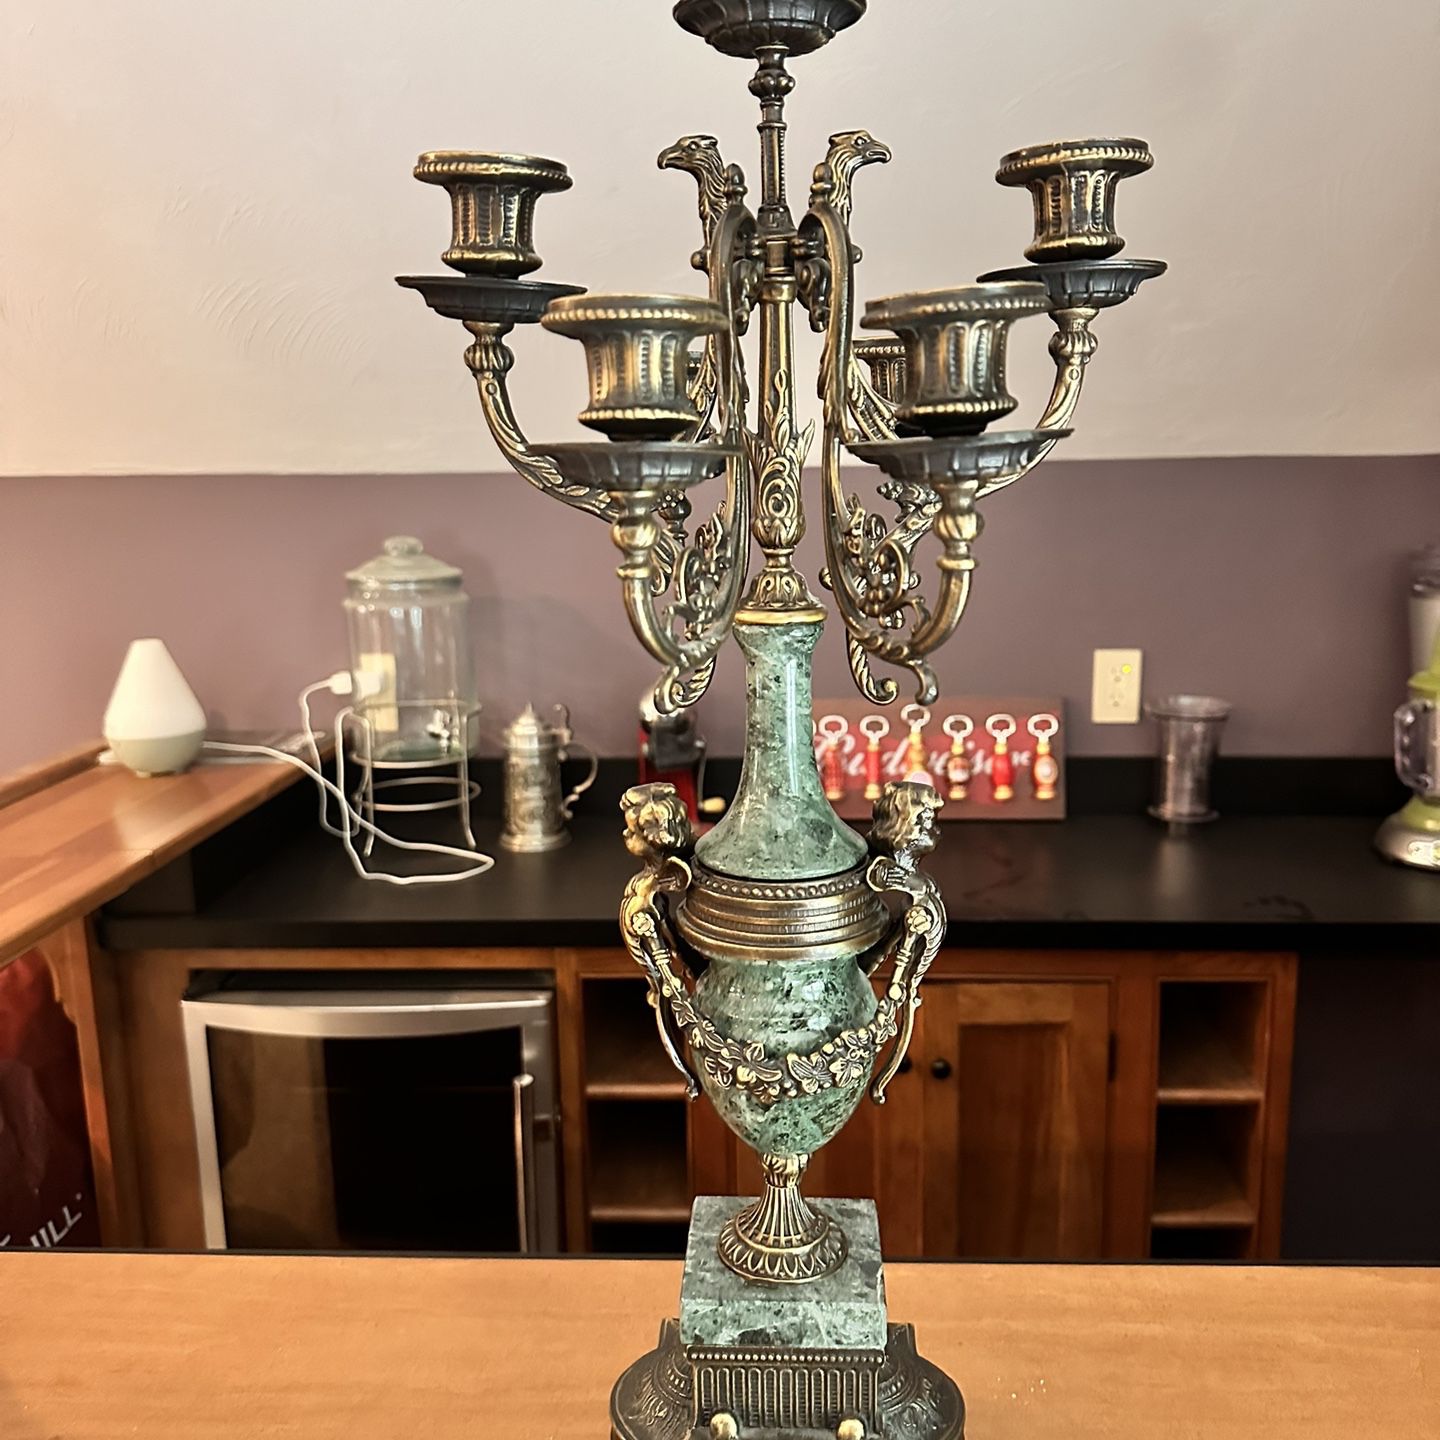 Early 20th Century Lancini Brass & Marble Imperial Candelabra, Made in Italy